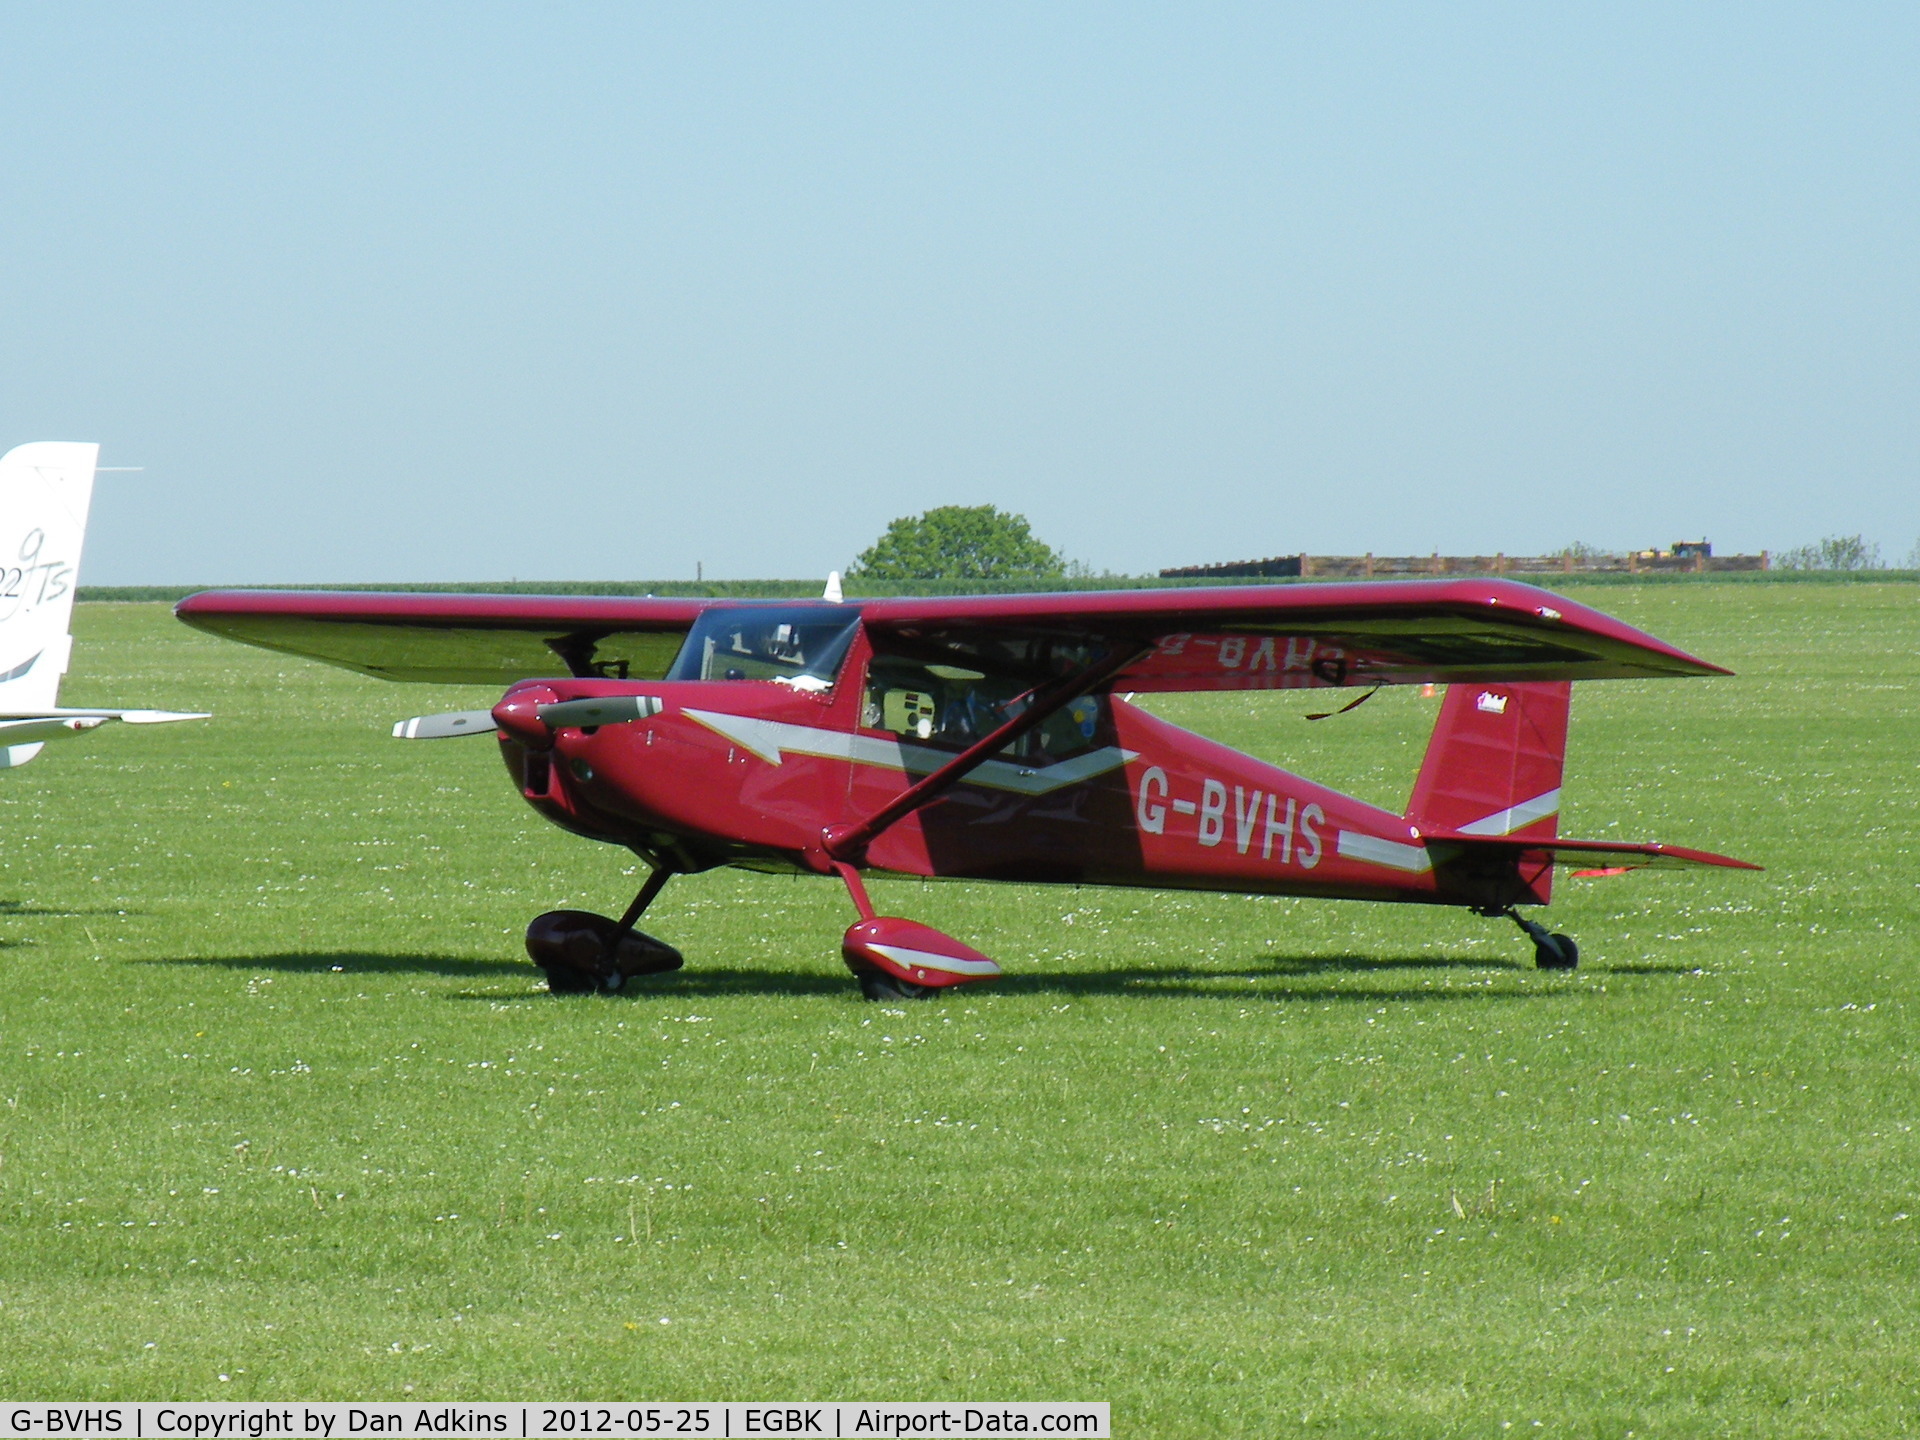 G-BVHS, 1994 Murphy Rebel C/N PFA 232-12180, G-BVHS parked up at the AeroExpo event at Sywell Aerodrome, Northamptonshire, UK, 25th May 2012.